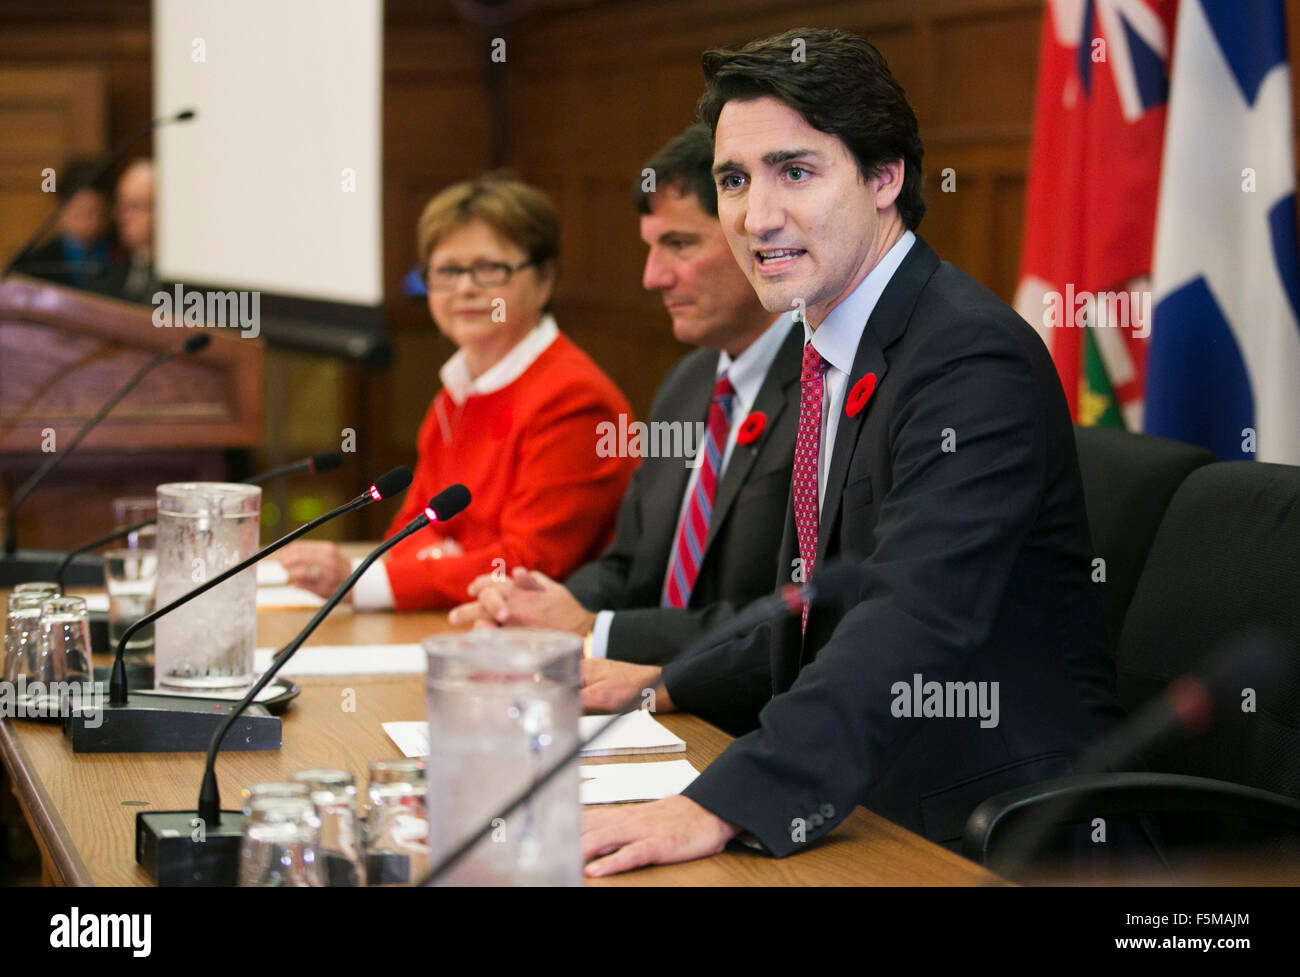 Ottawa, Canada. 5th Nov, 2015. Canadian Prime Minister Justin Trudeau addresses his first caucus at Parliament Hill in Ottawa, Canada, Nov. 5, 2015. © Chris Roussakis/Xinhua/Alamy Live News Stock Photo